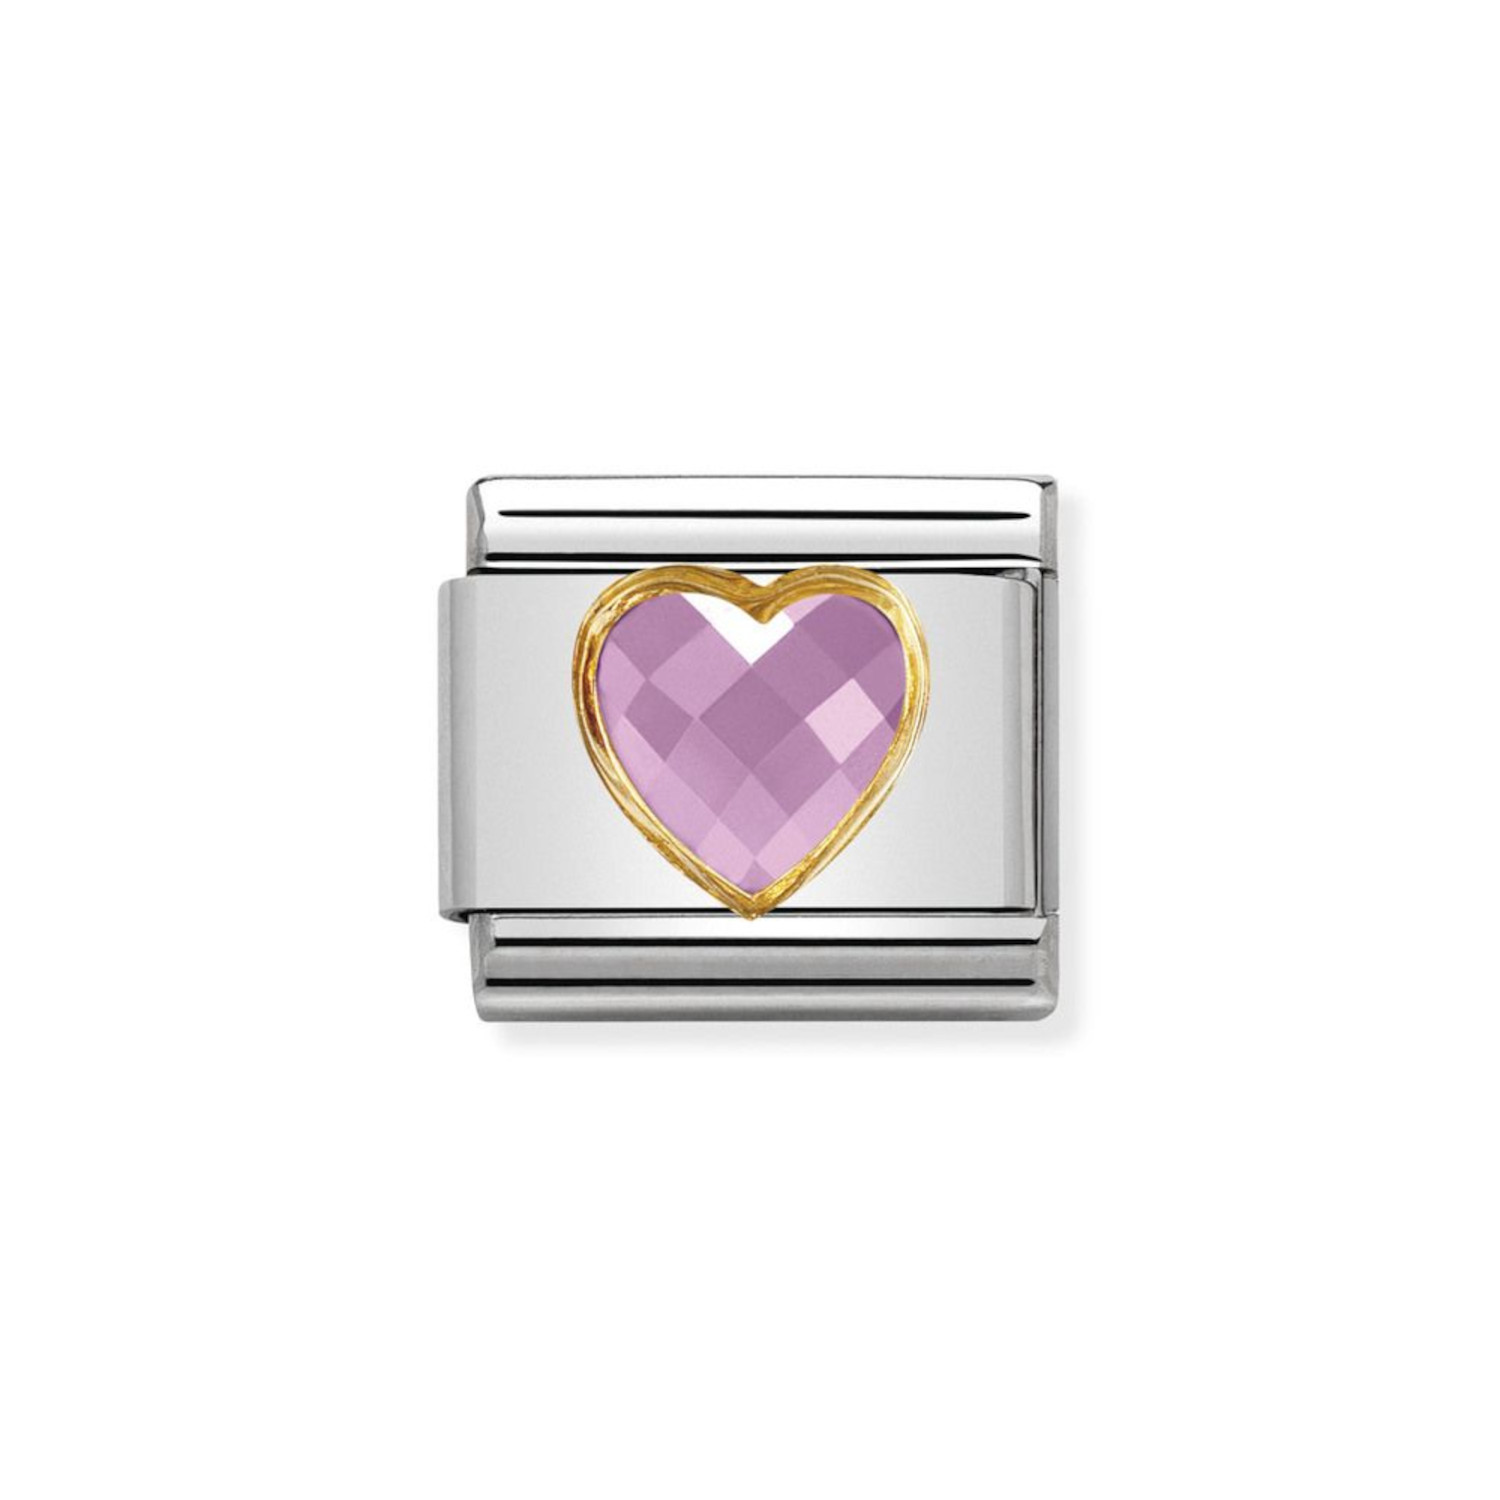 NOMINATION COMPOSABLE CLASSIC LINK IN 18K GOLD WITH MULTIFACETED PINK HEART 030610/003